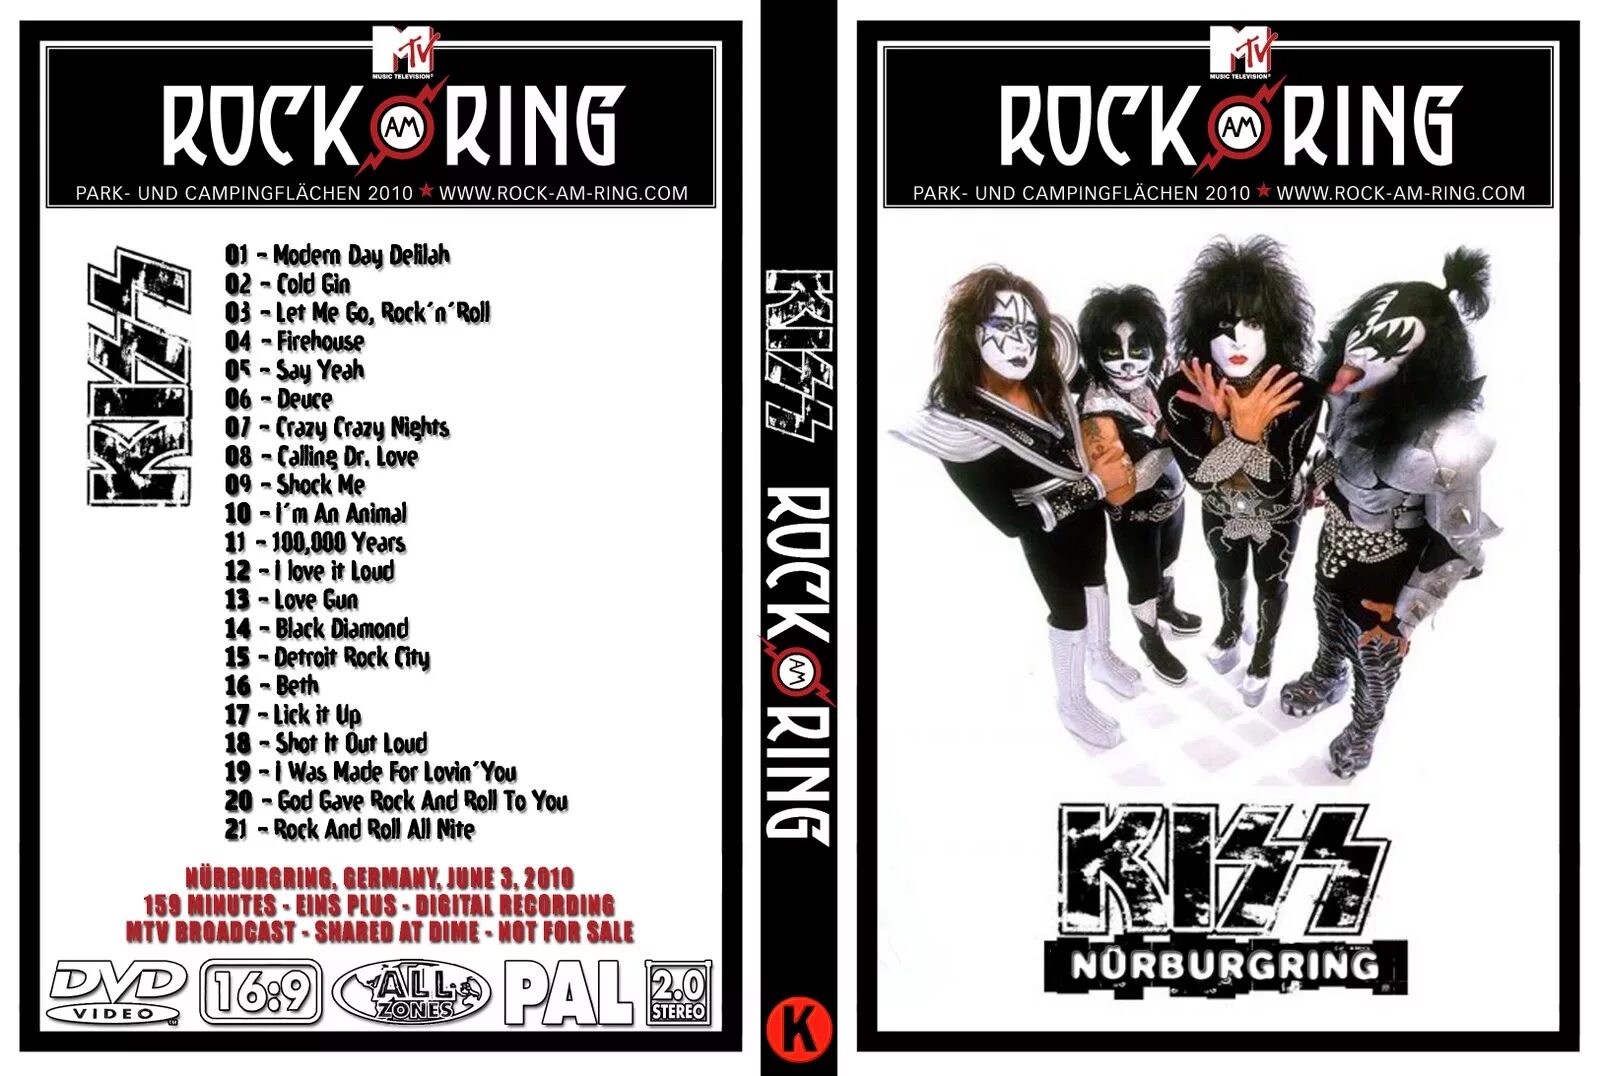 Rock am Ring. Рок 2010. Rock am Ring 2010. Обложка диска Kiss - Live at Rock am Ring 2010. Song rock me